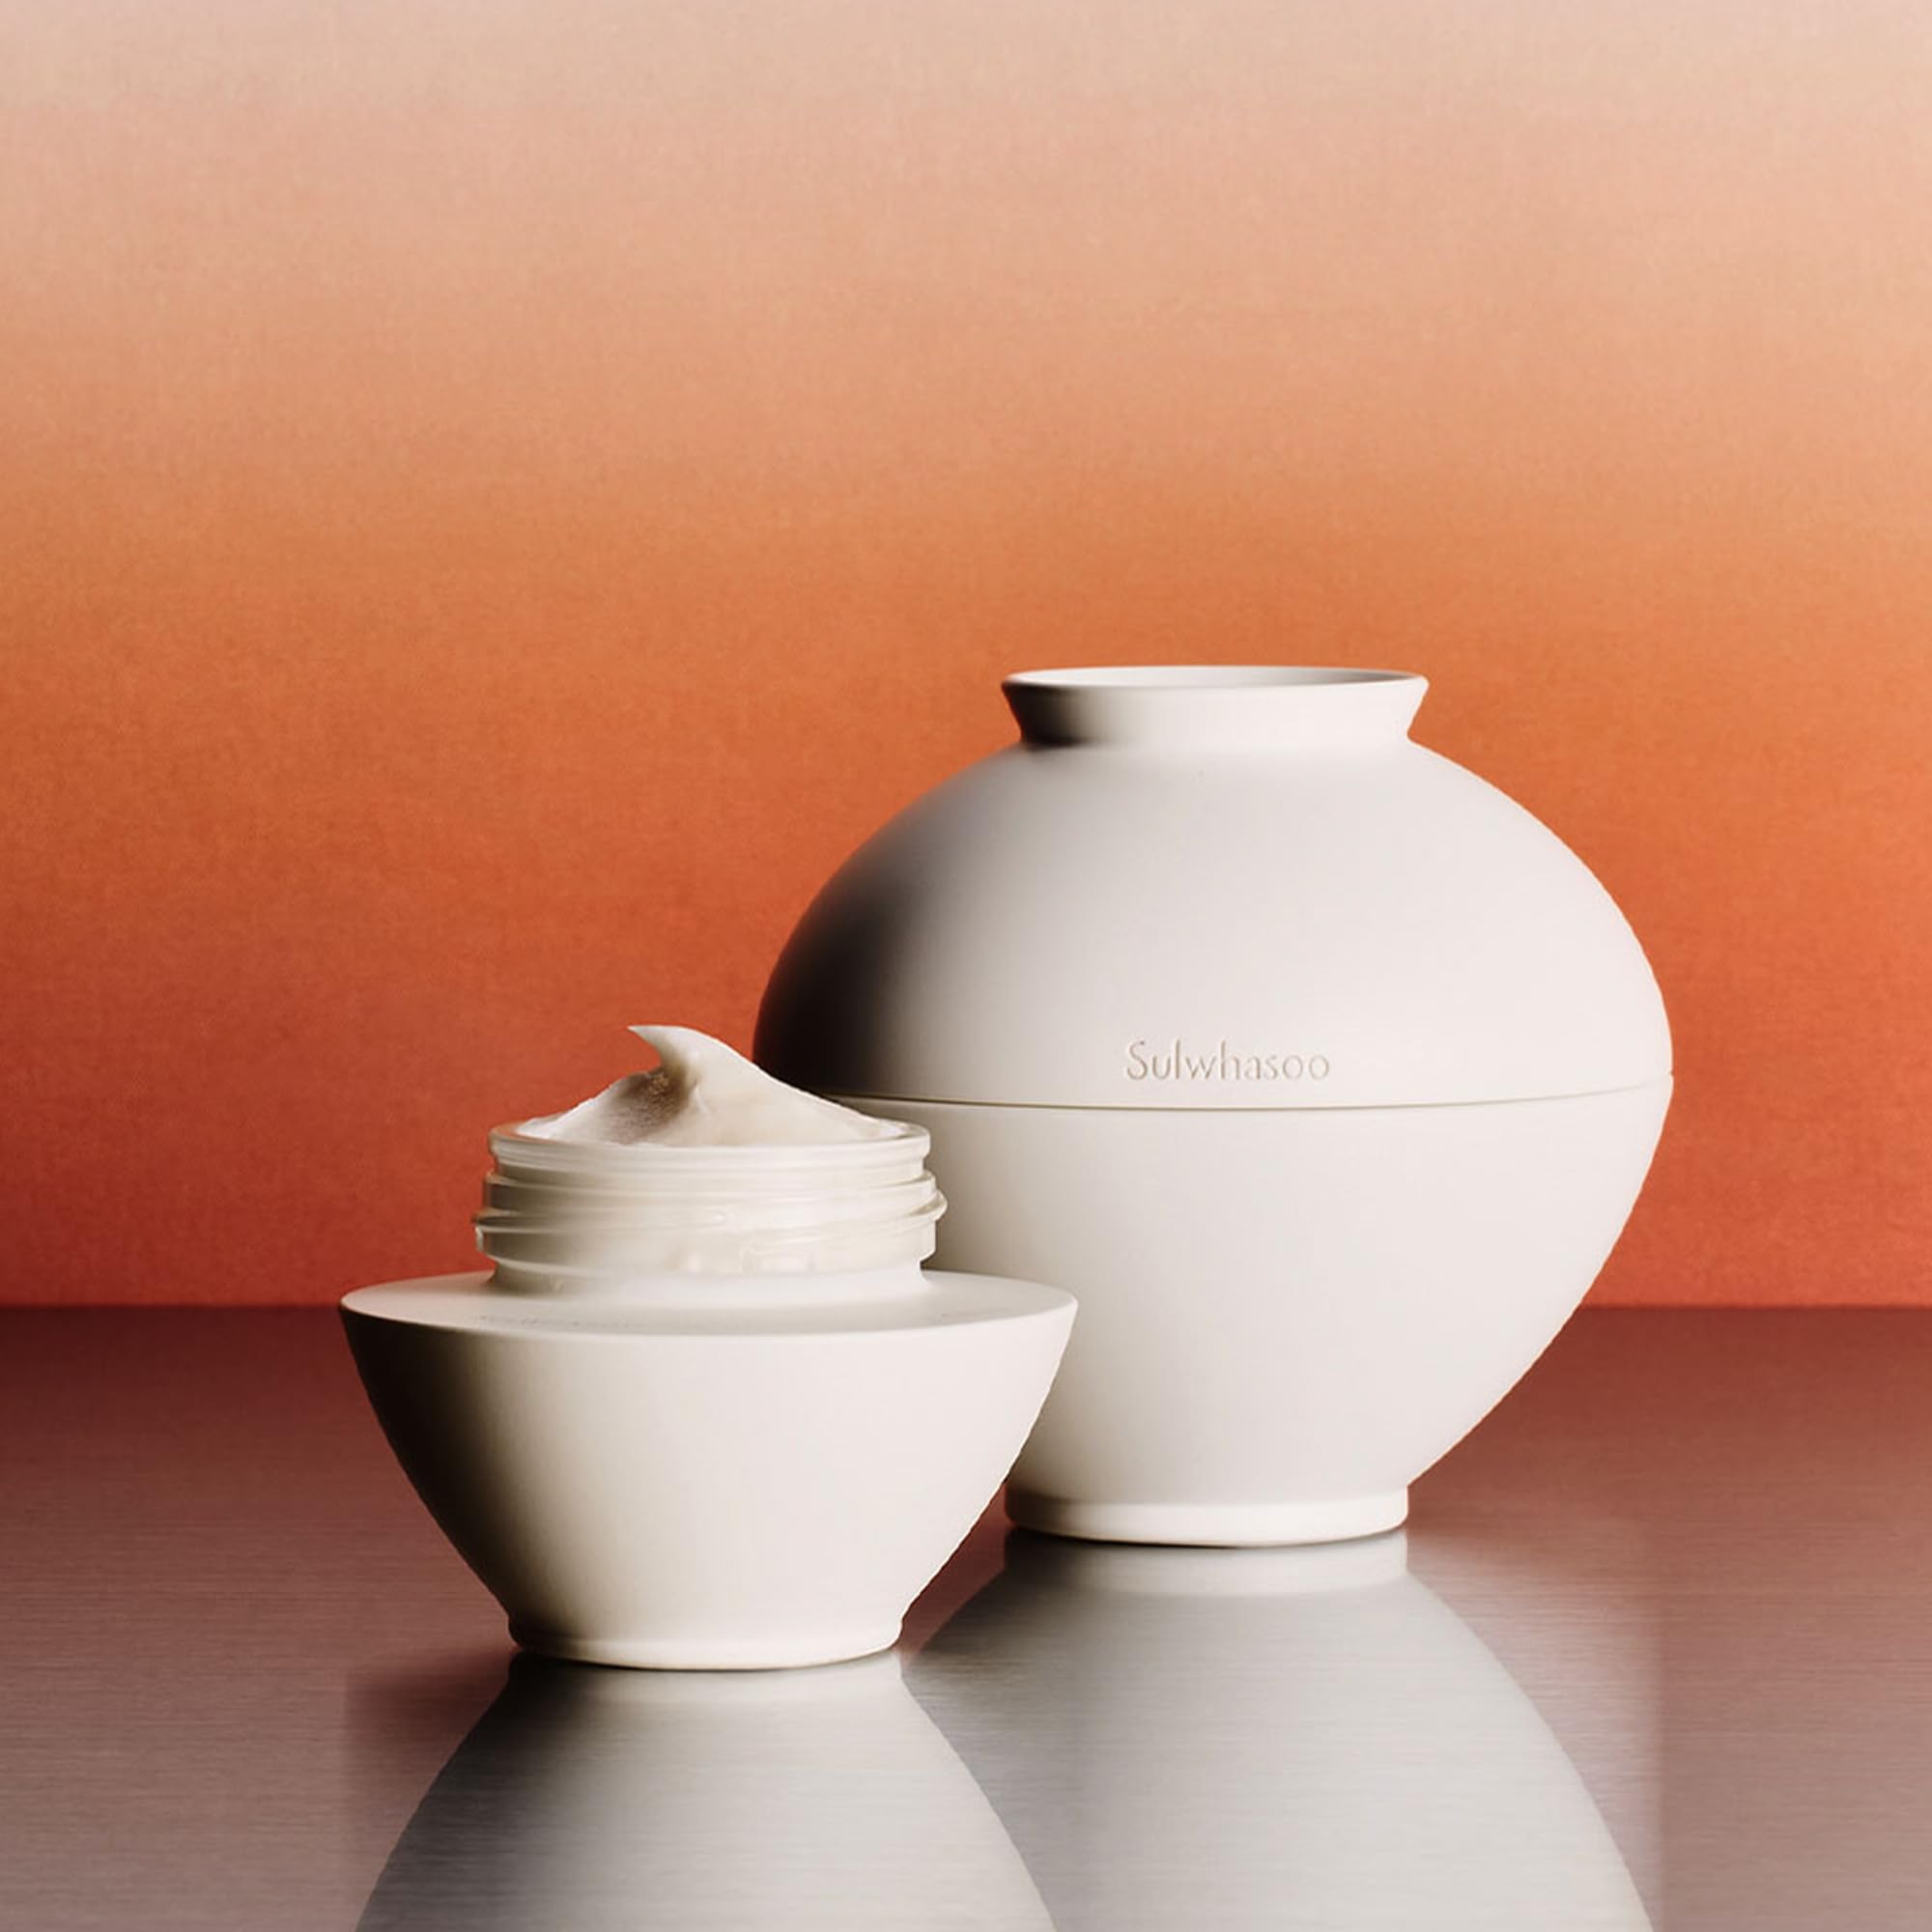 Sulwhasoo Ultimate S Eye Cream: Hydrates, Visibly Firm, Improves the Look of Deep Set Eye Wrinkles